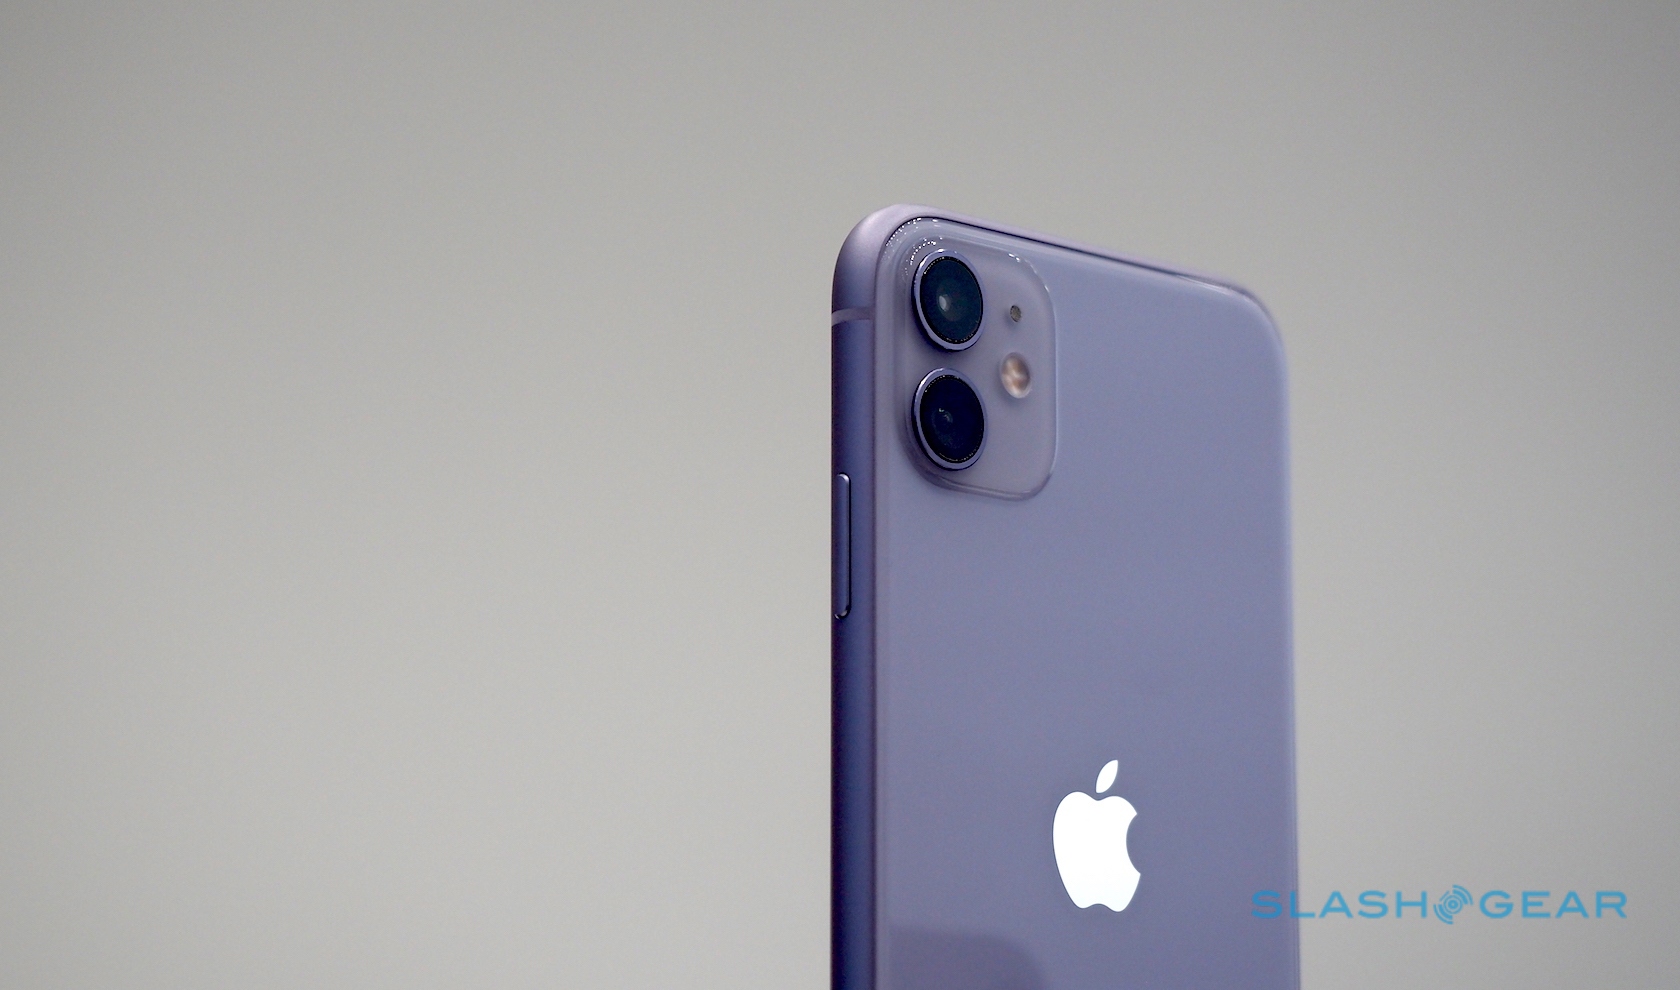 Huge Iphone 12 Leak Details Prices Cameras Colors And Release Date Surprise Slashgear